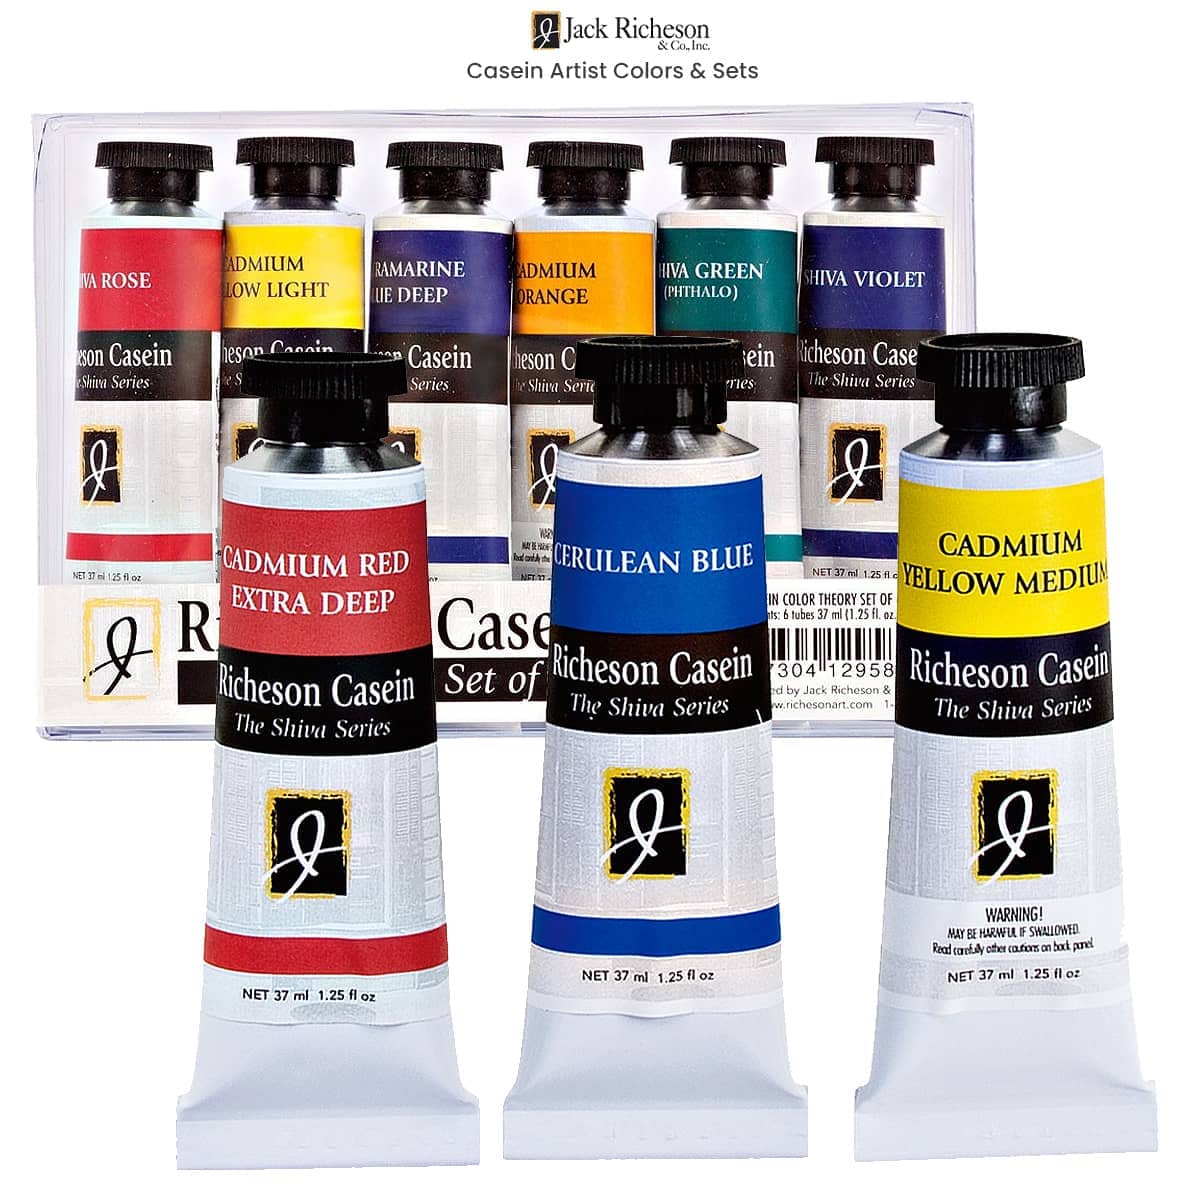 LUKAS Berlin PRO Artists Water Mixable Oil Paints & Sets